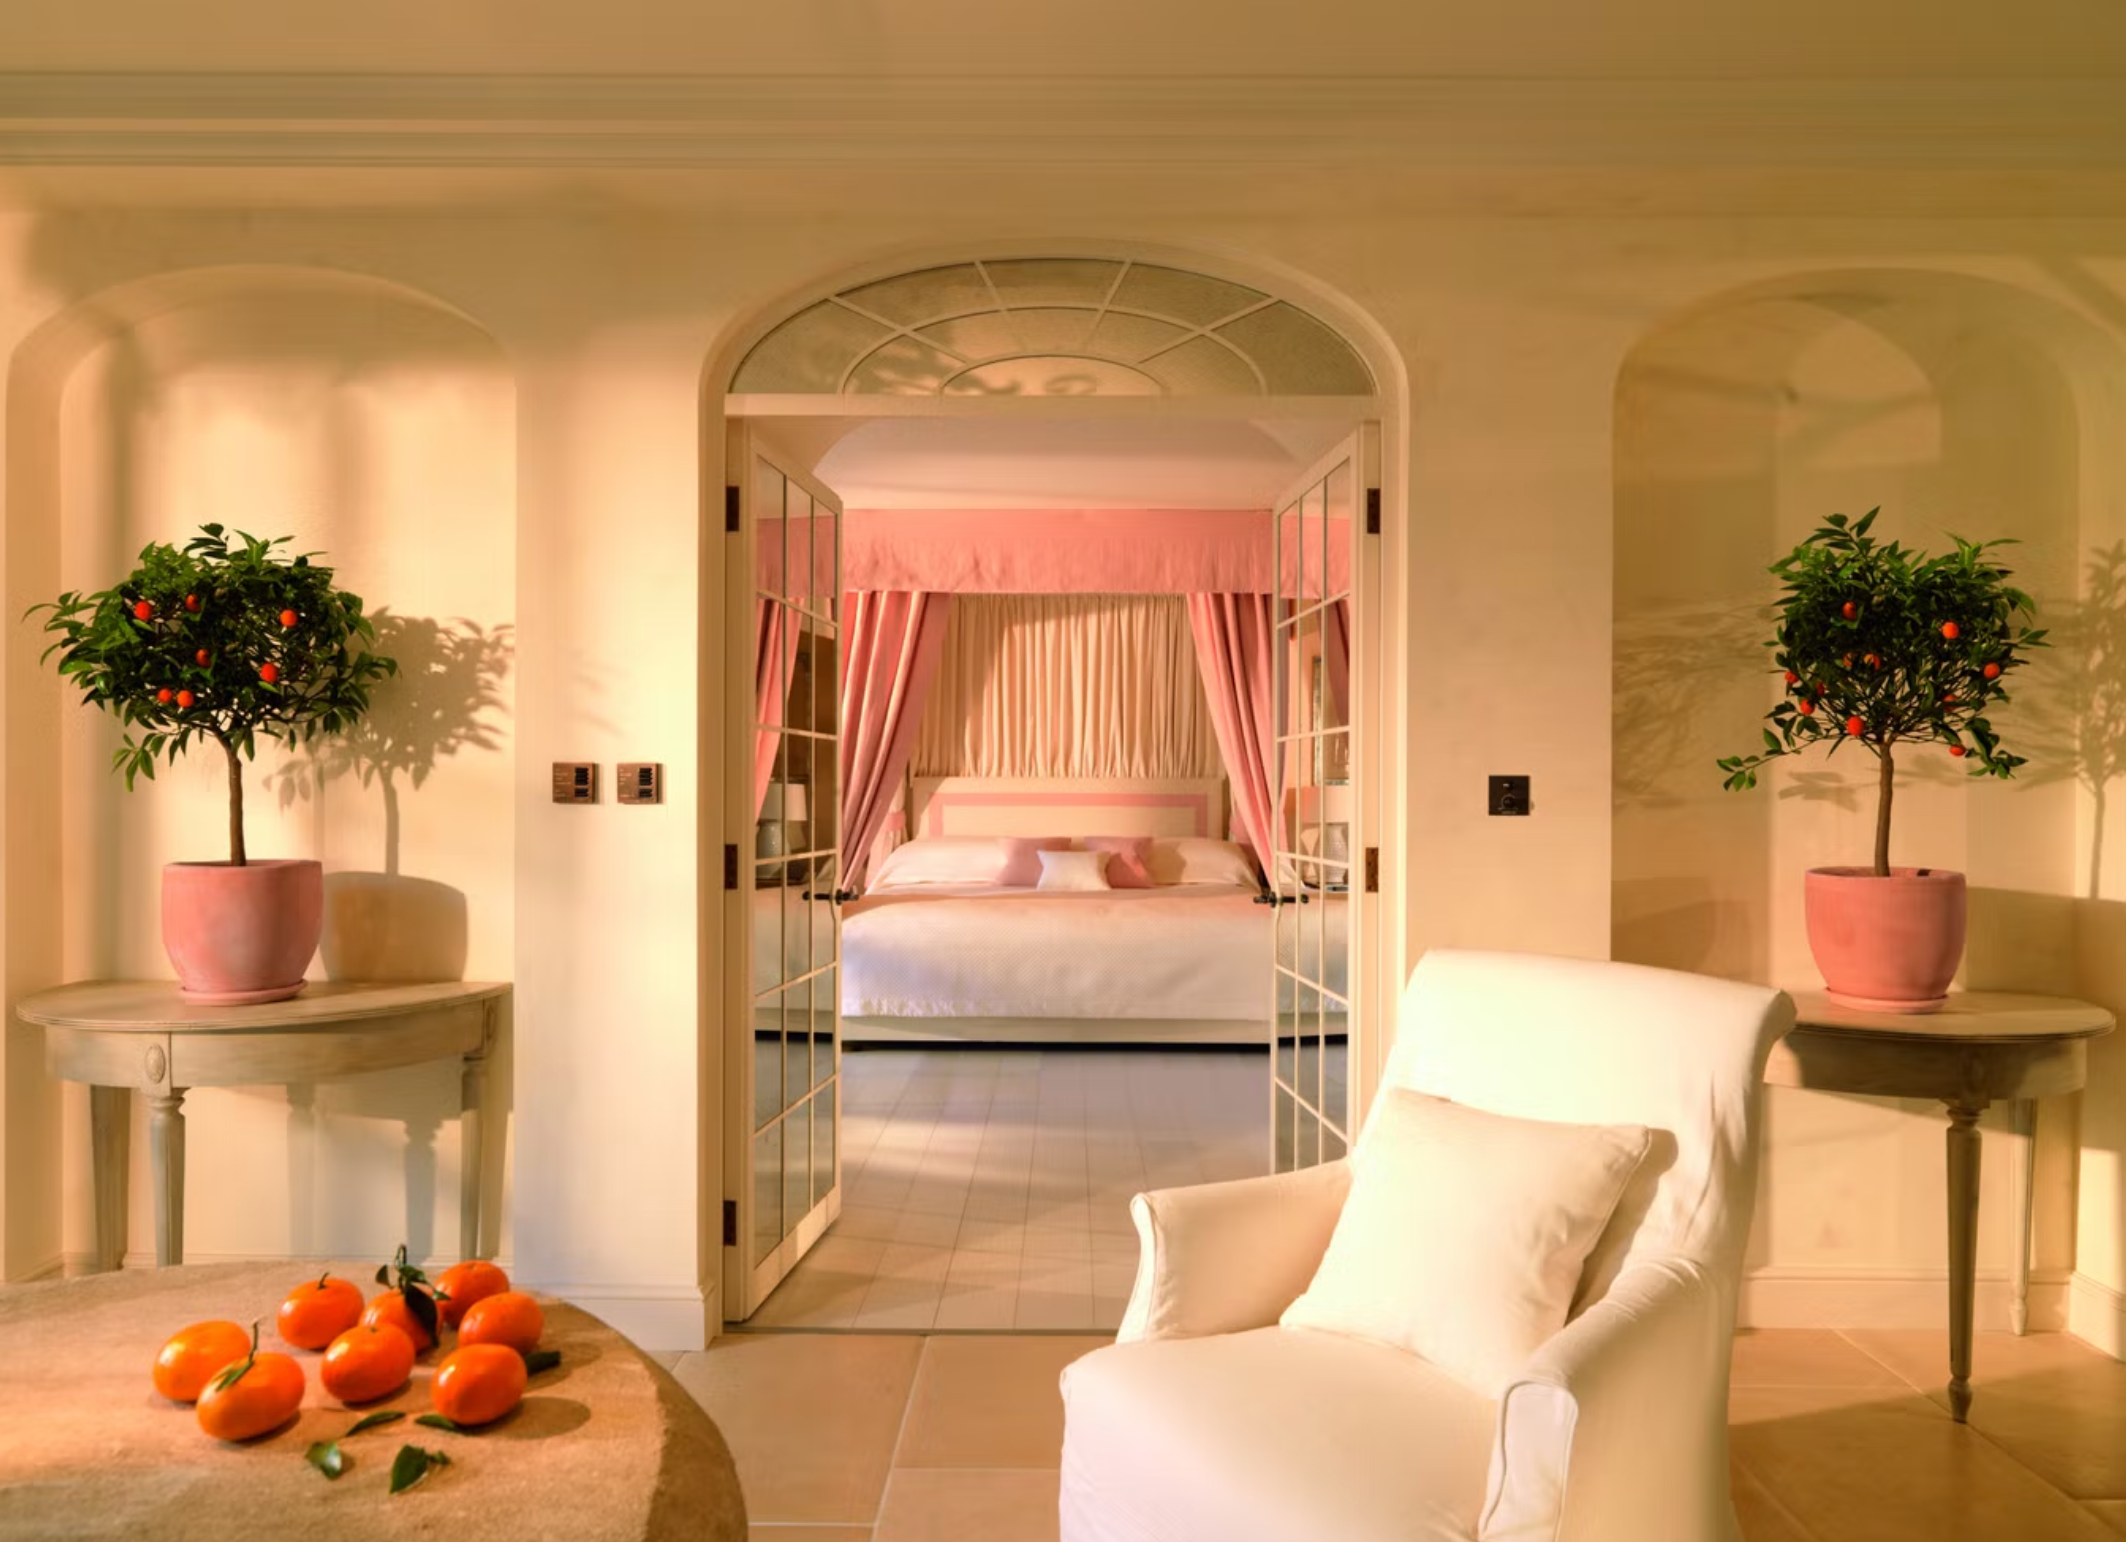 One of the suites at Le Manoir